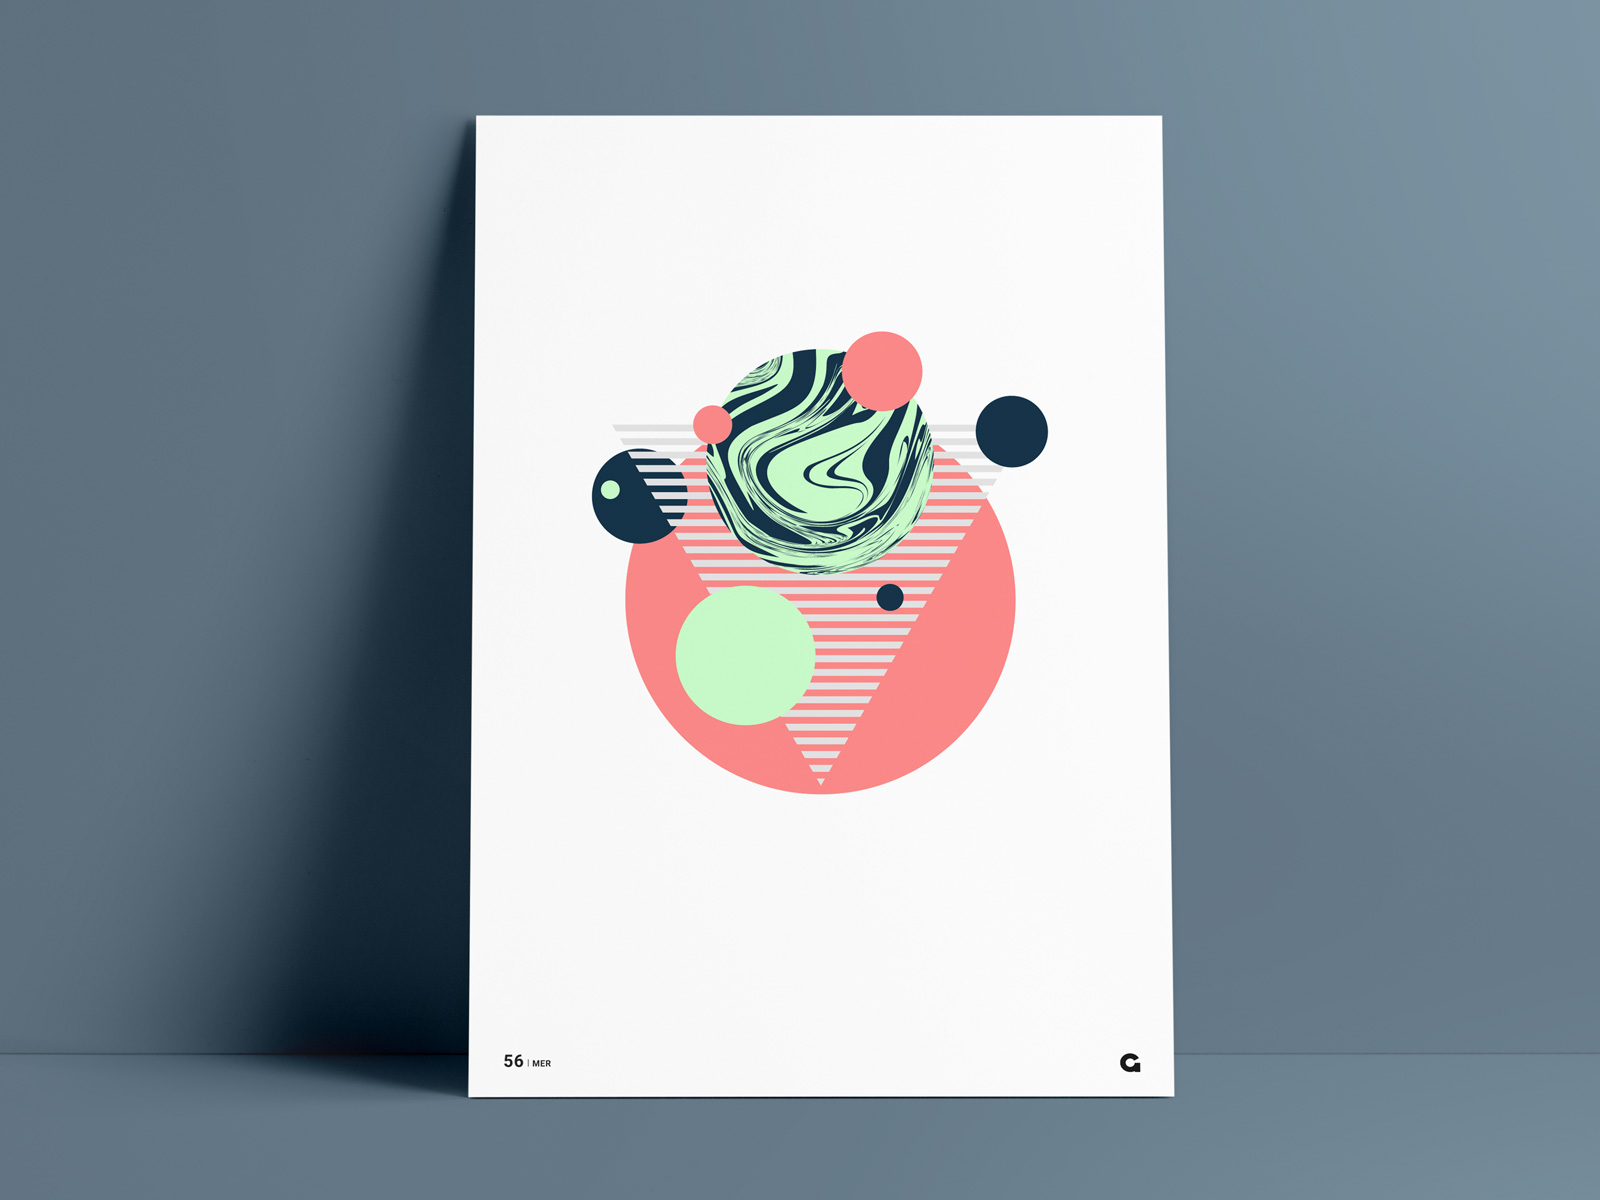 Poster 56 - Liquify shapes orange pale green mint abstract geometric triangular triangle striped poster a day poster challenge agrib circular circles liquify liquid wall art poster vector